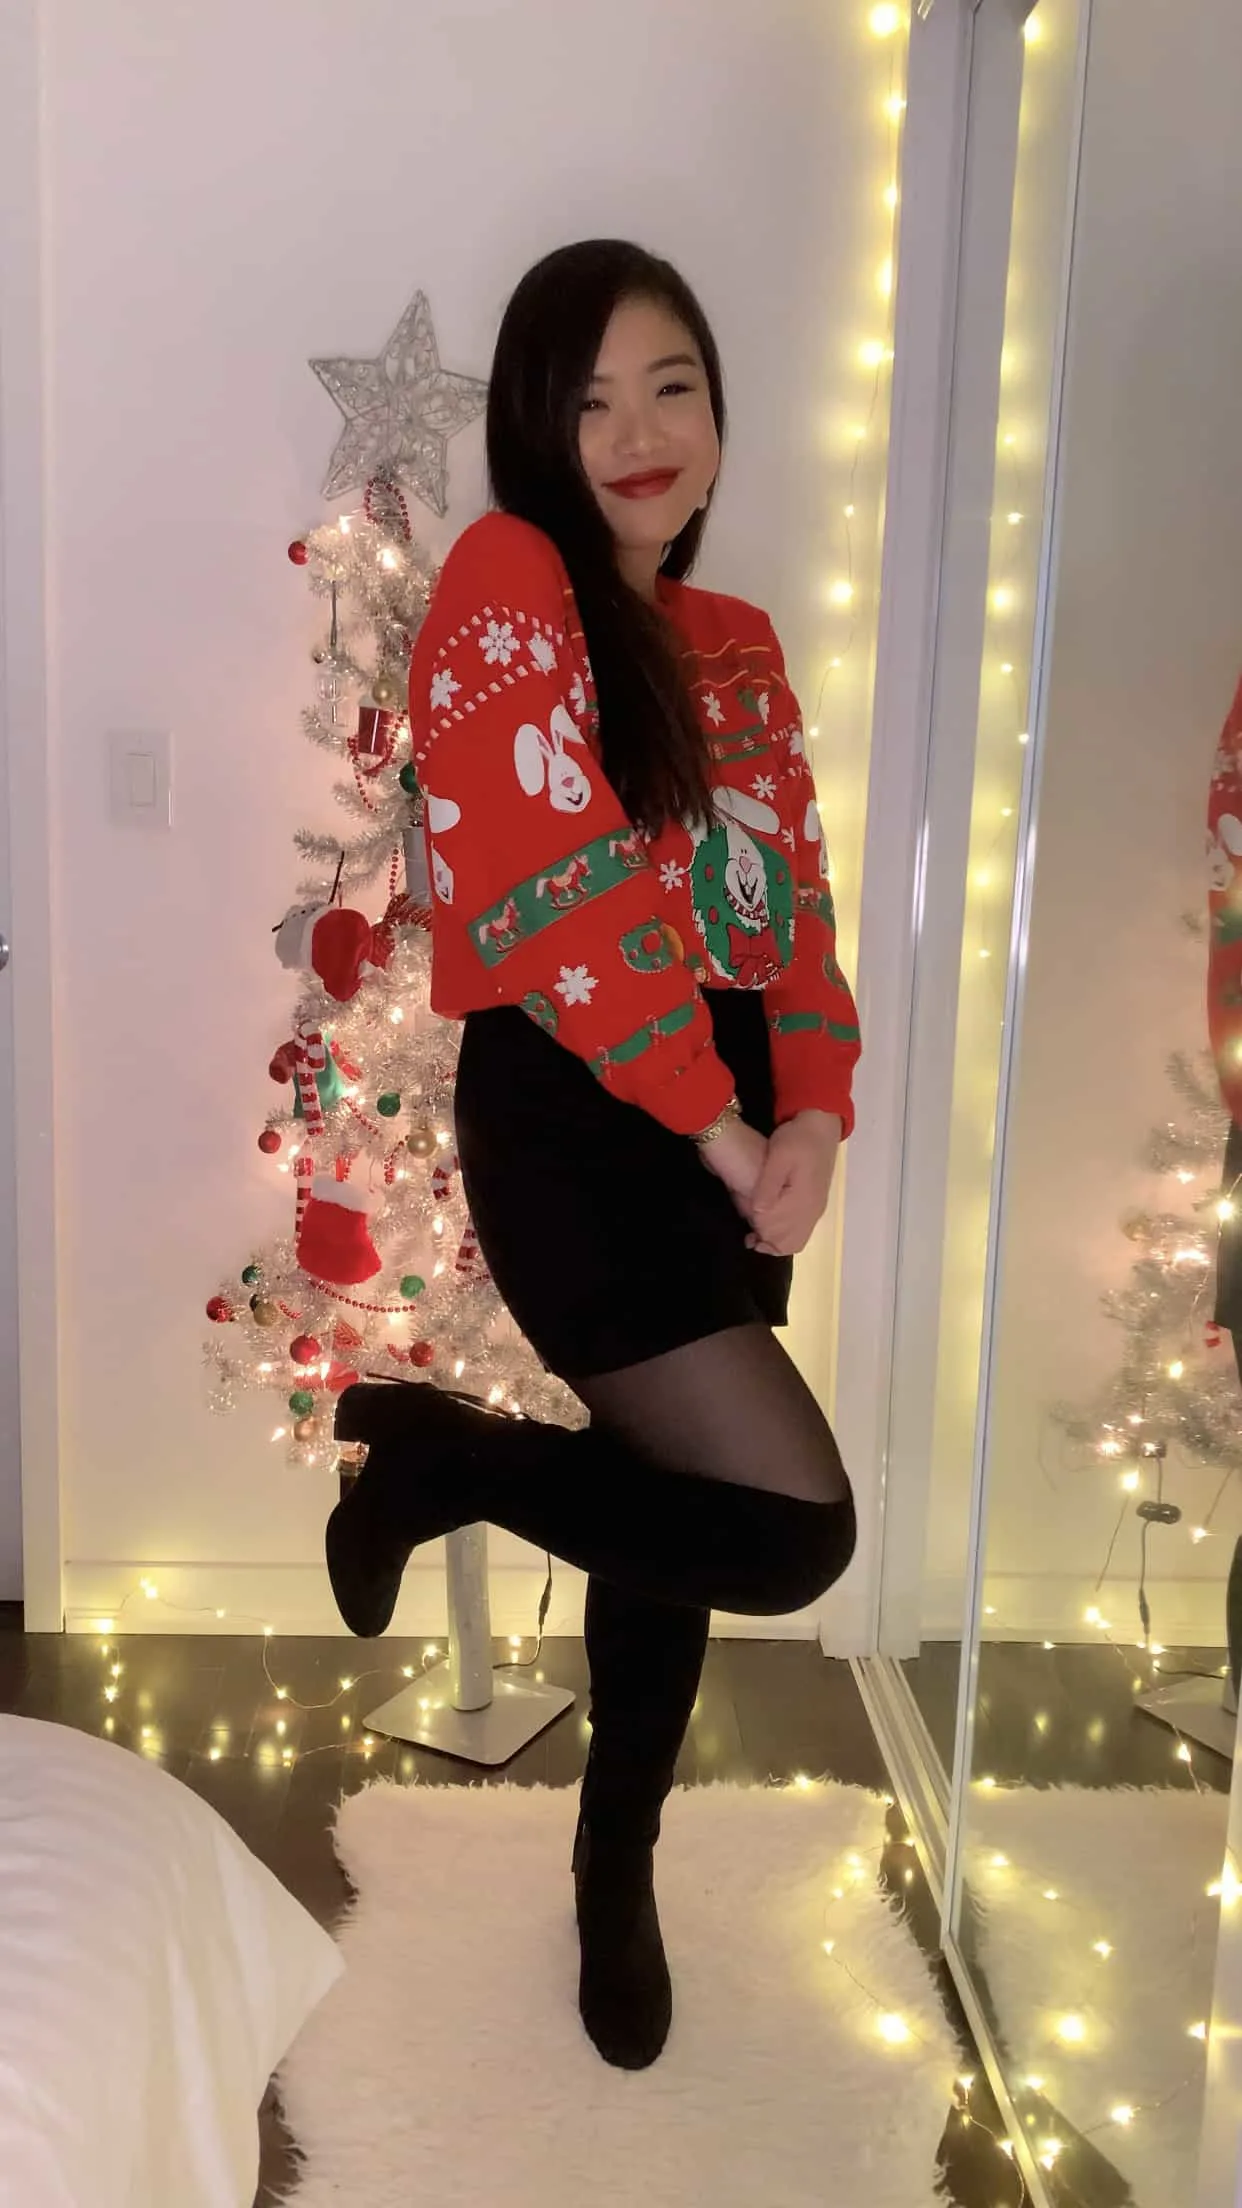 Ugly Christmas sweater outfit ideas to wear this holiday season if you're not sure how to style them!